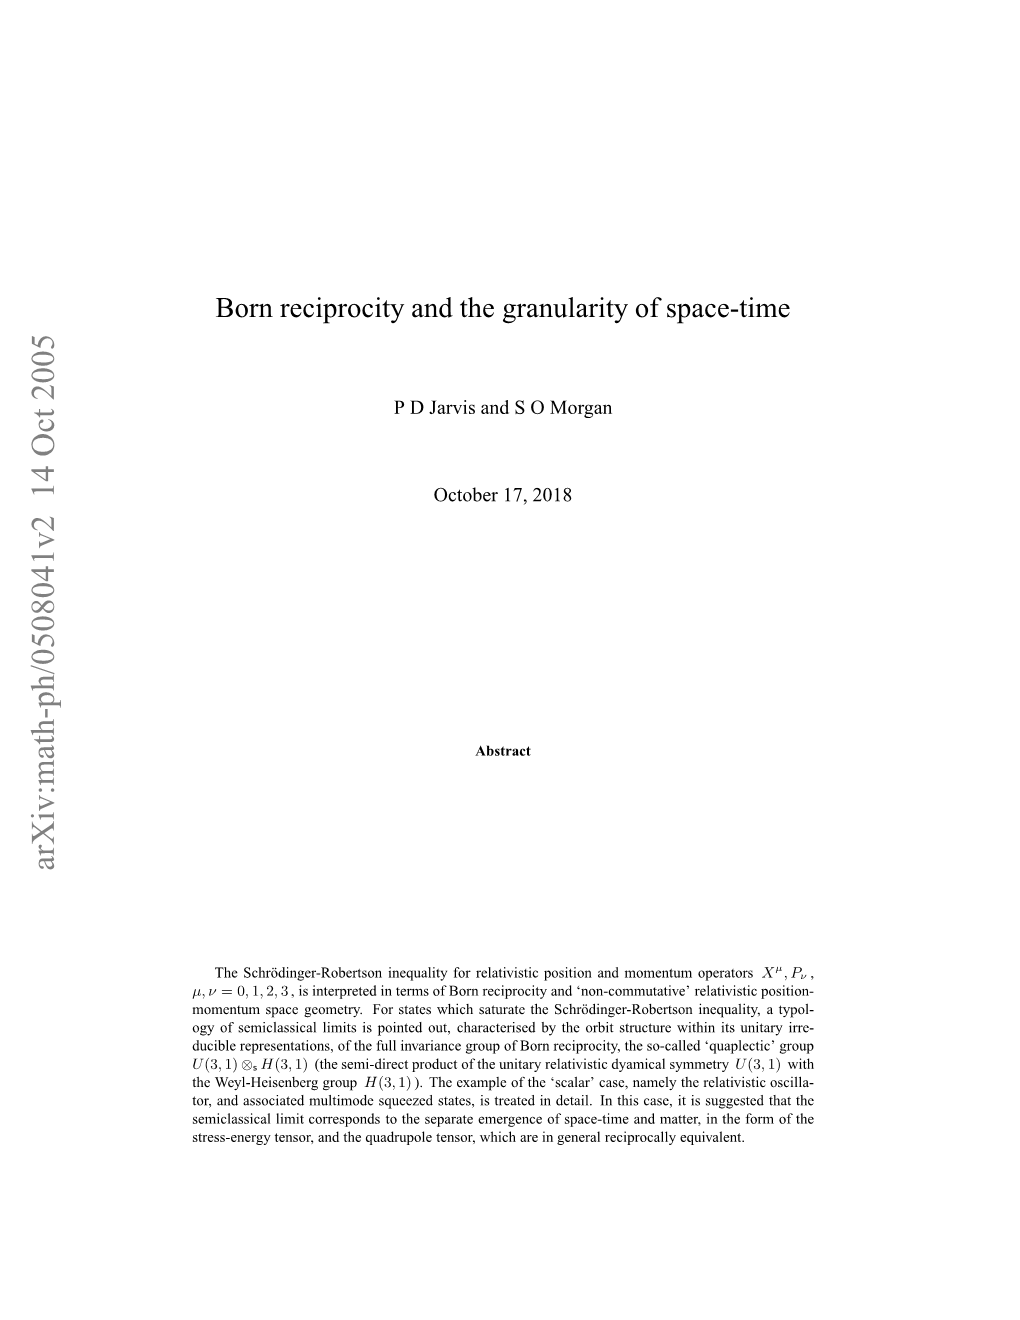 Born Reciprocity and the Granularity of Space-Time